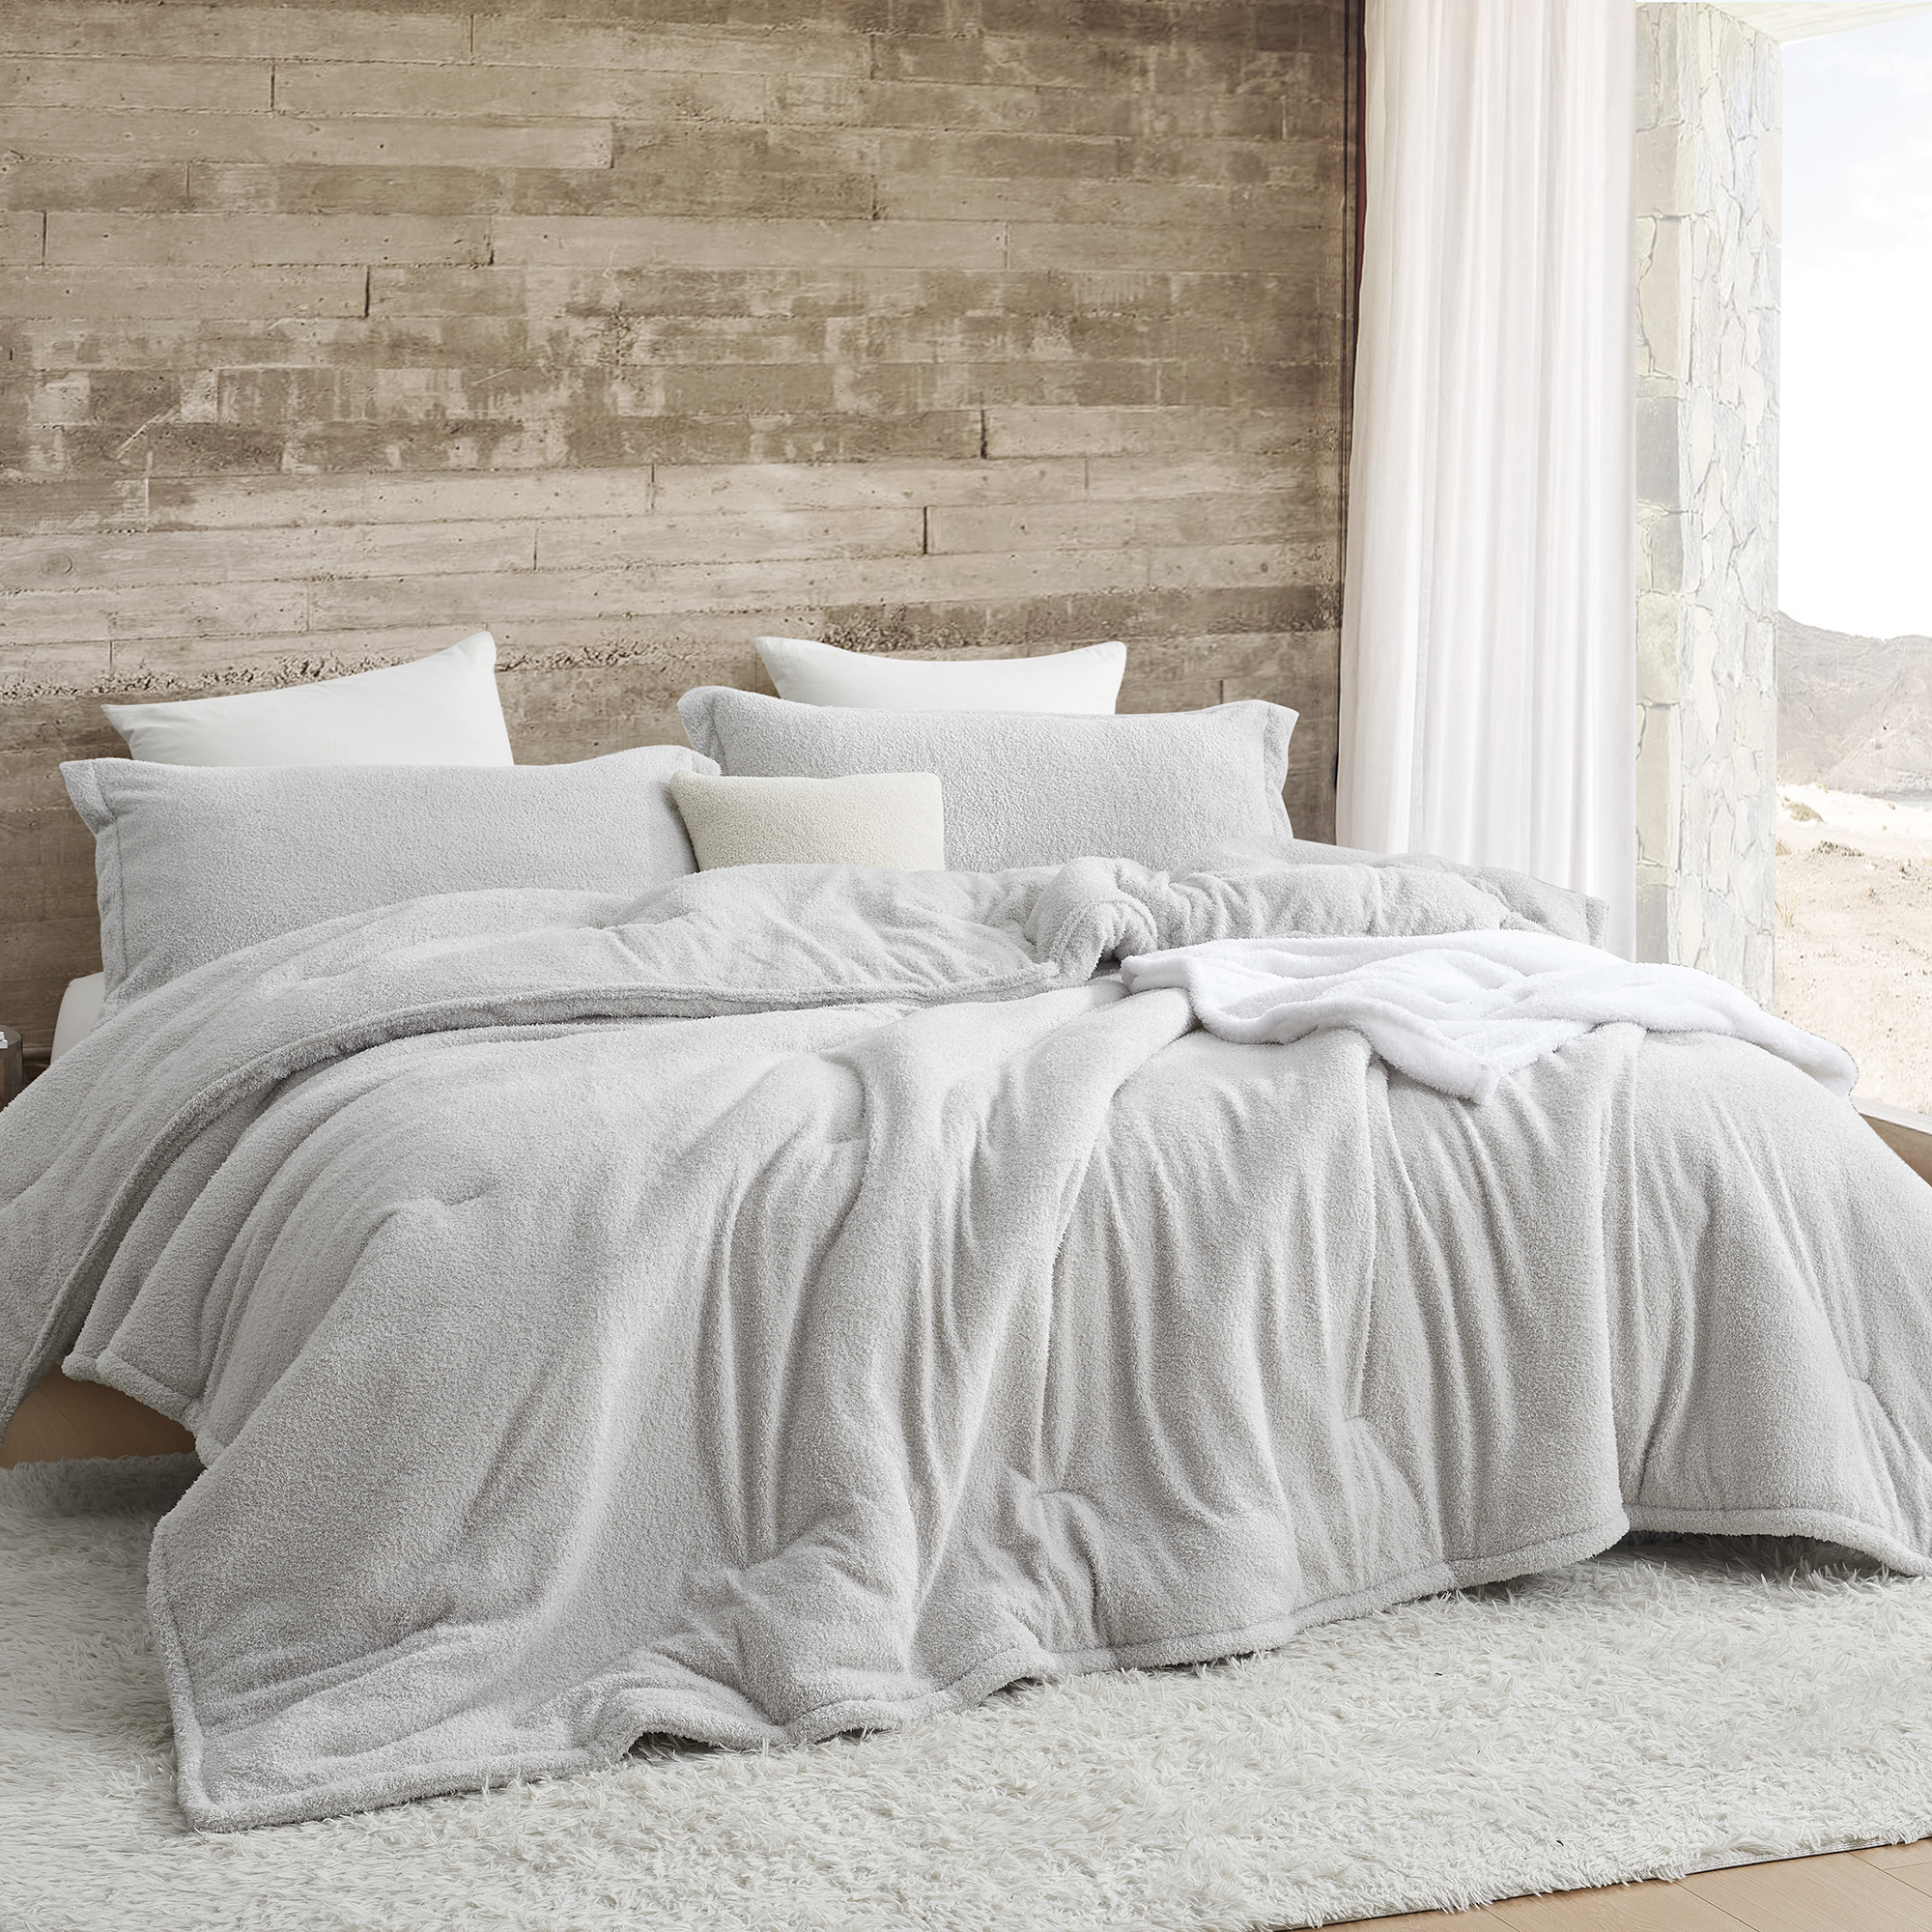 Cozy Moody - Coma Inducer® Oversized Comforter - Light Gray